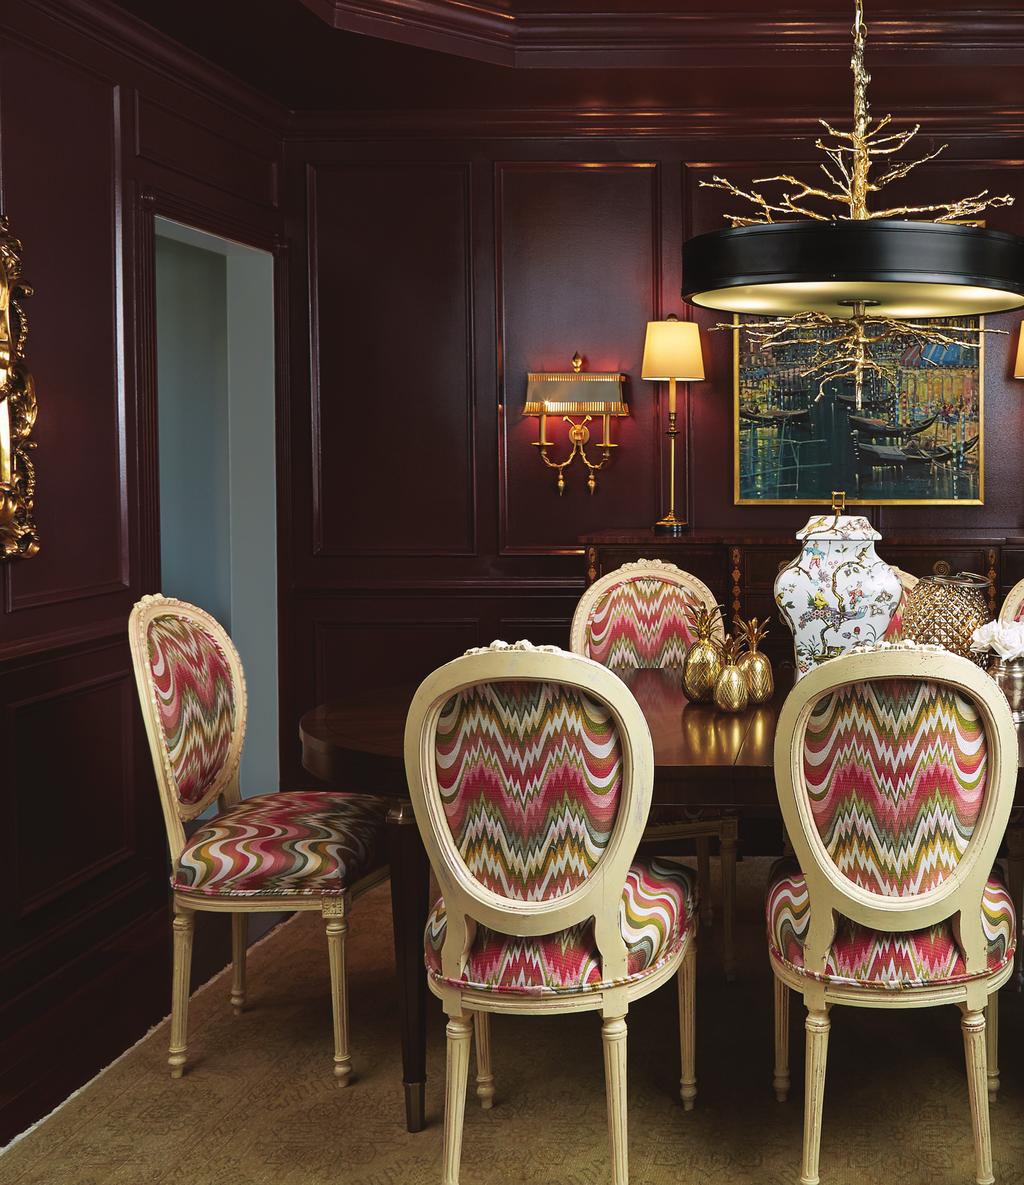 The lacquered, Marsala-colored walls and the table s burl-wood finish in the dining room create an intimate, warm atmosphere, contrasted by the lively, colorful pattern on the fabric of the Louis